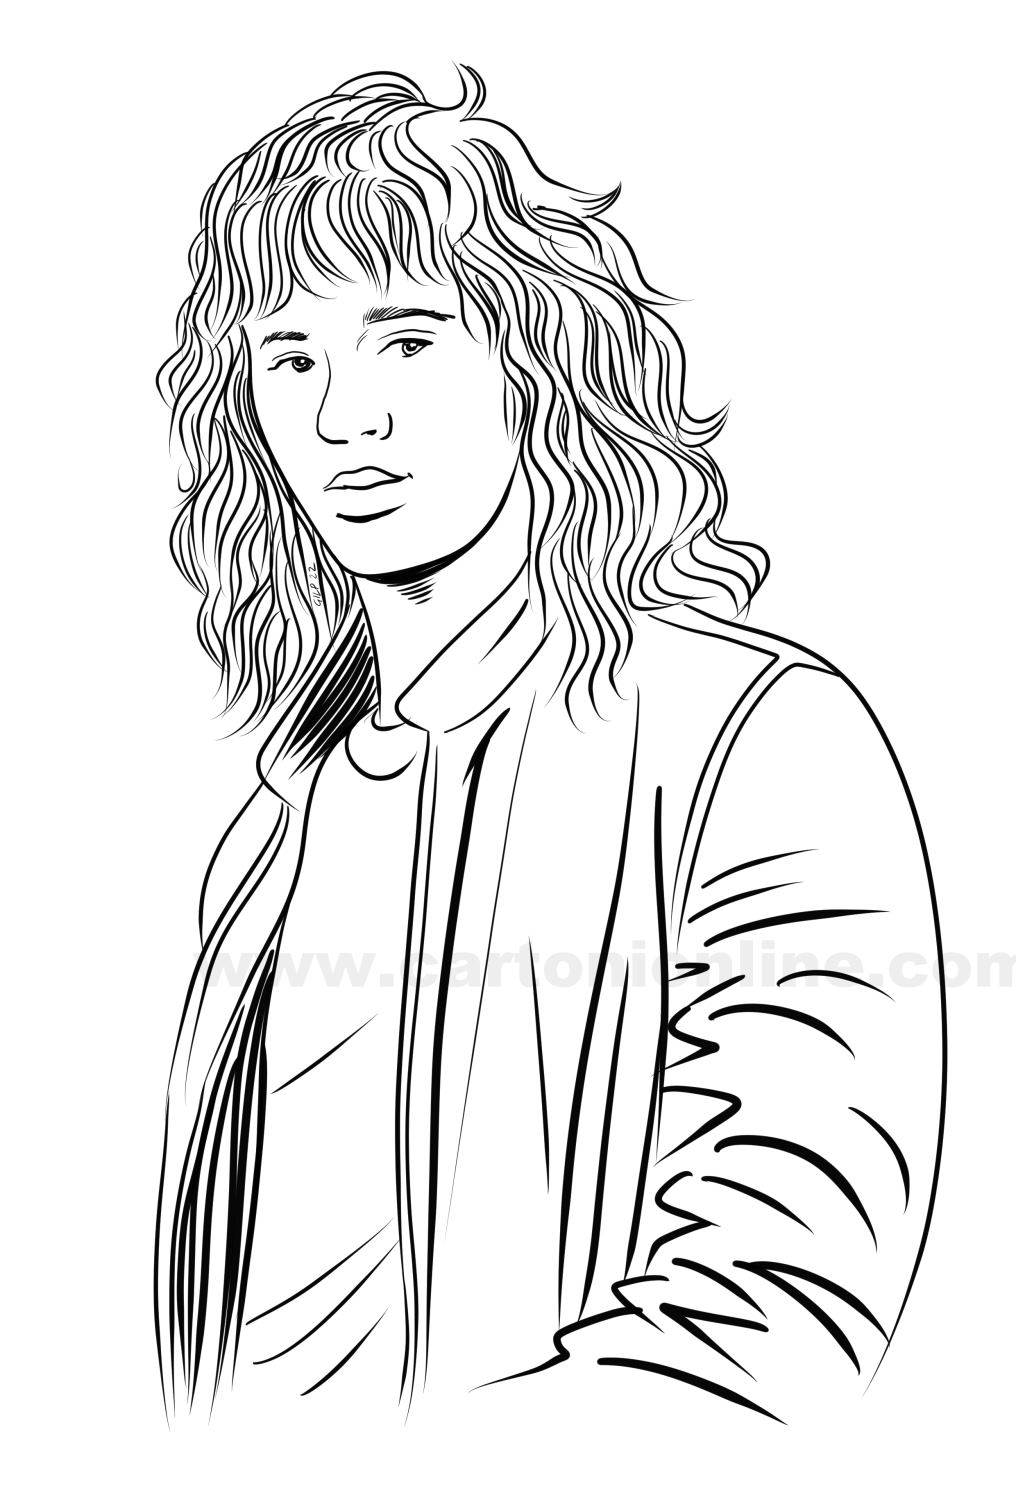 Eddie Munson 04 von Stranger Things coloring page to print and coloring